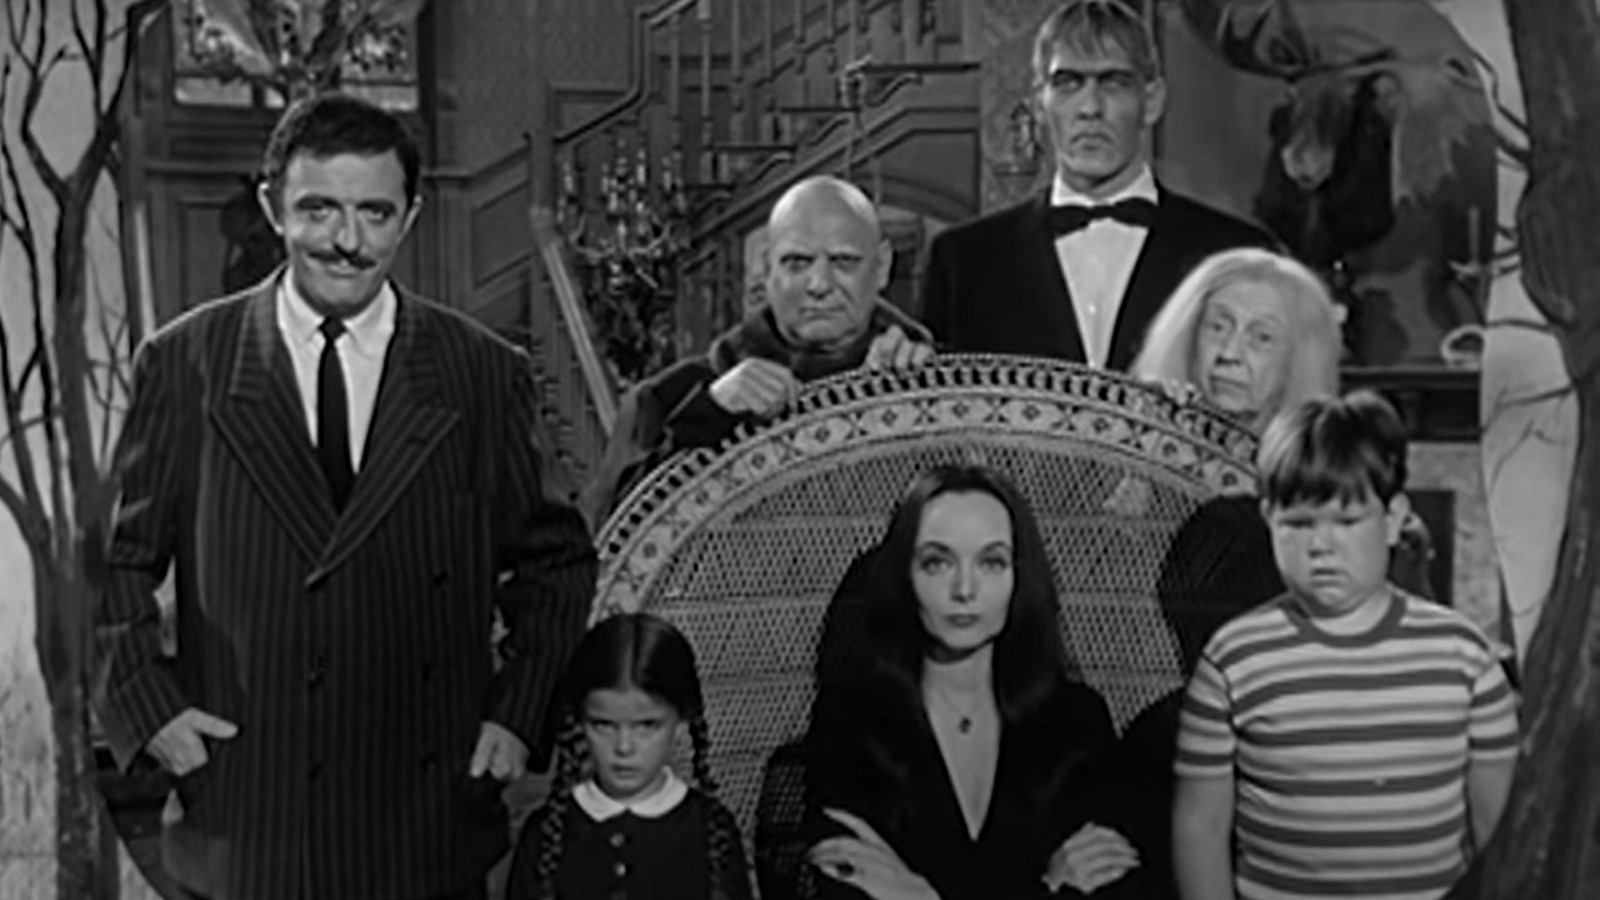 Whatever Happened To The Original Cast Of The Addams Family?